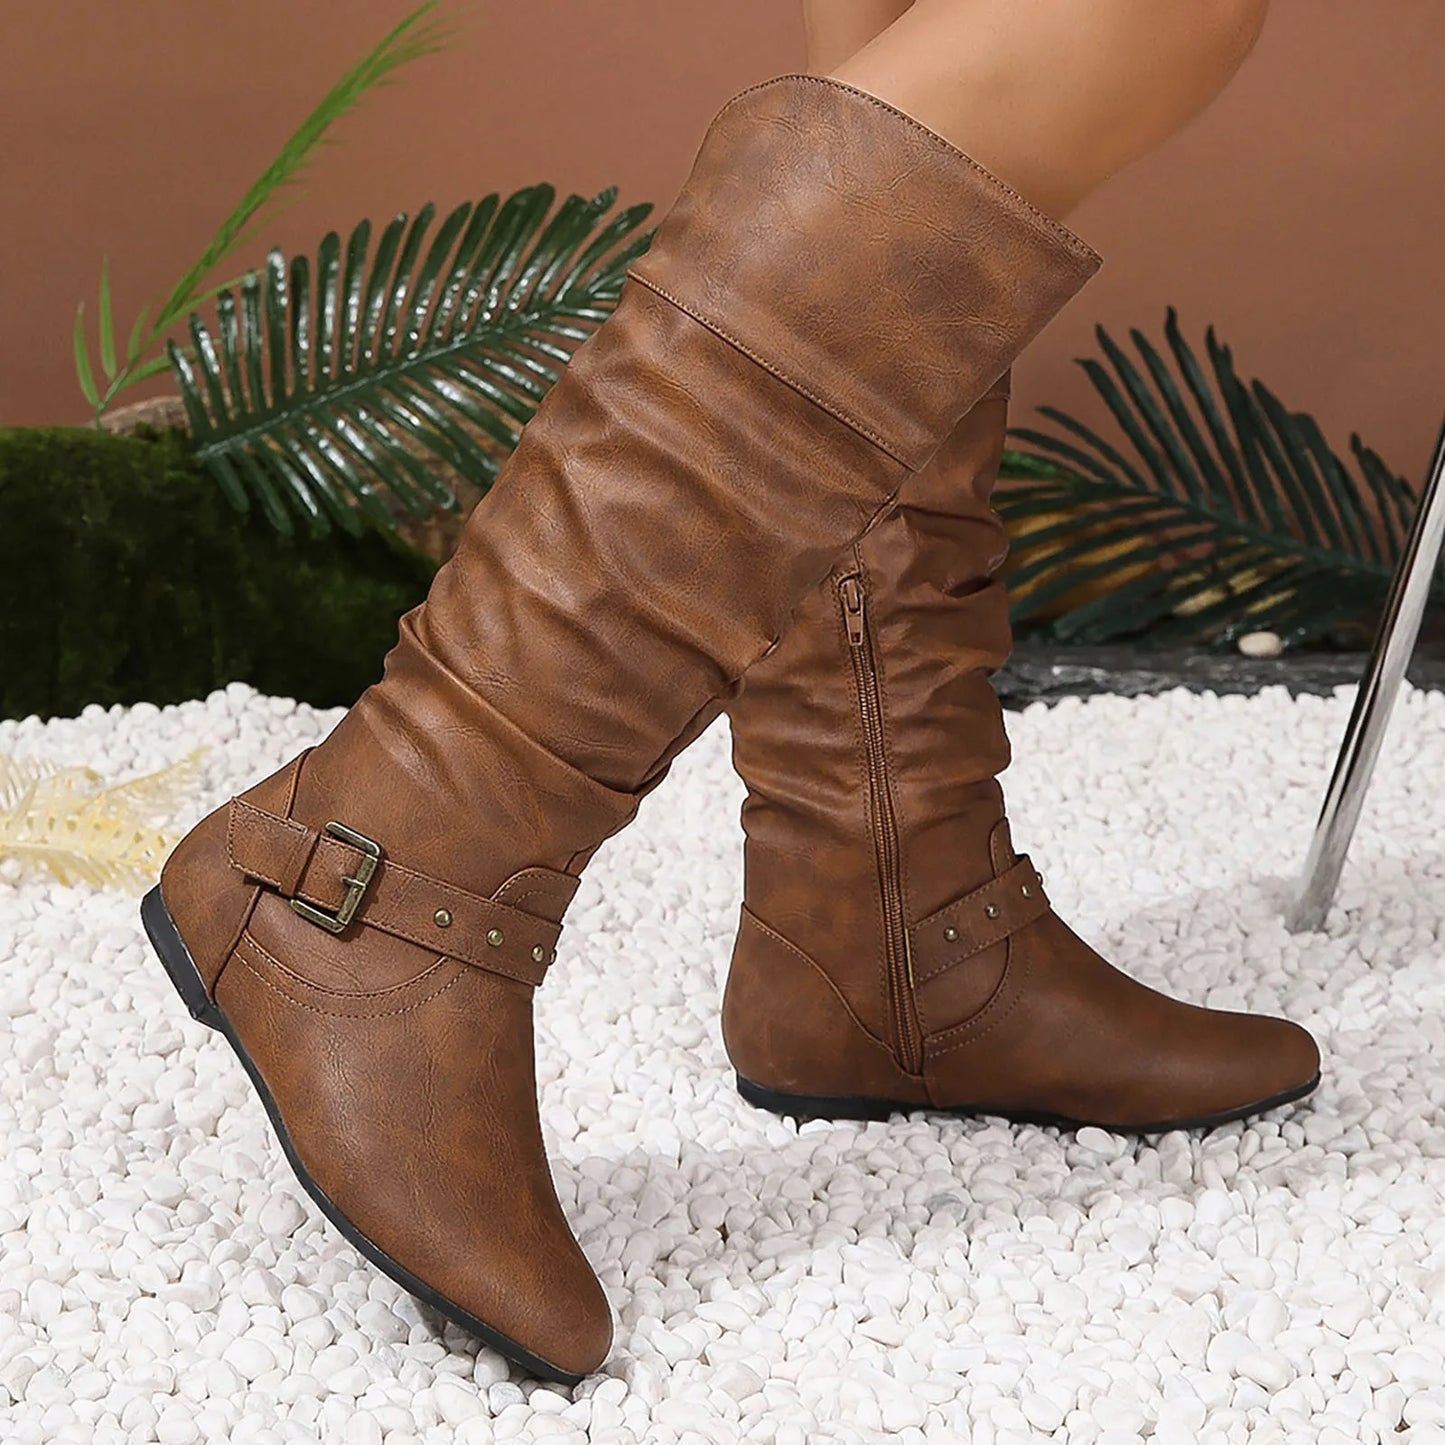 Leather Boots Women Western Mid Calf Boots Retro Knee High Long Elegant Boots Thigh Booties Winter Heeled Knee Boots Party Shoes